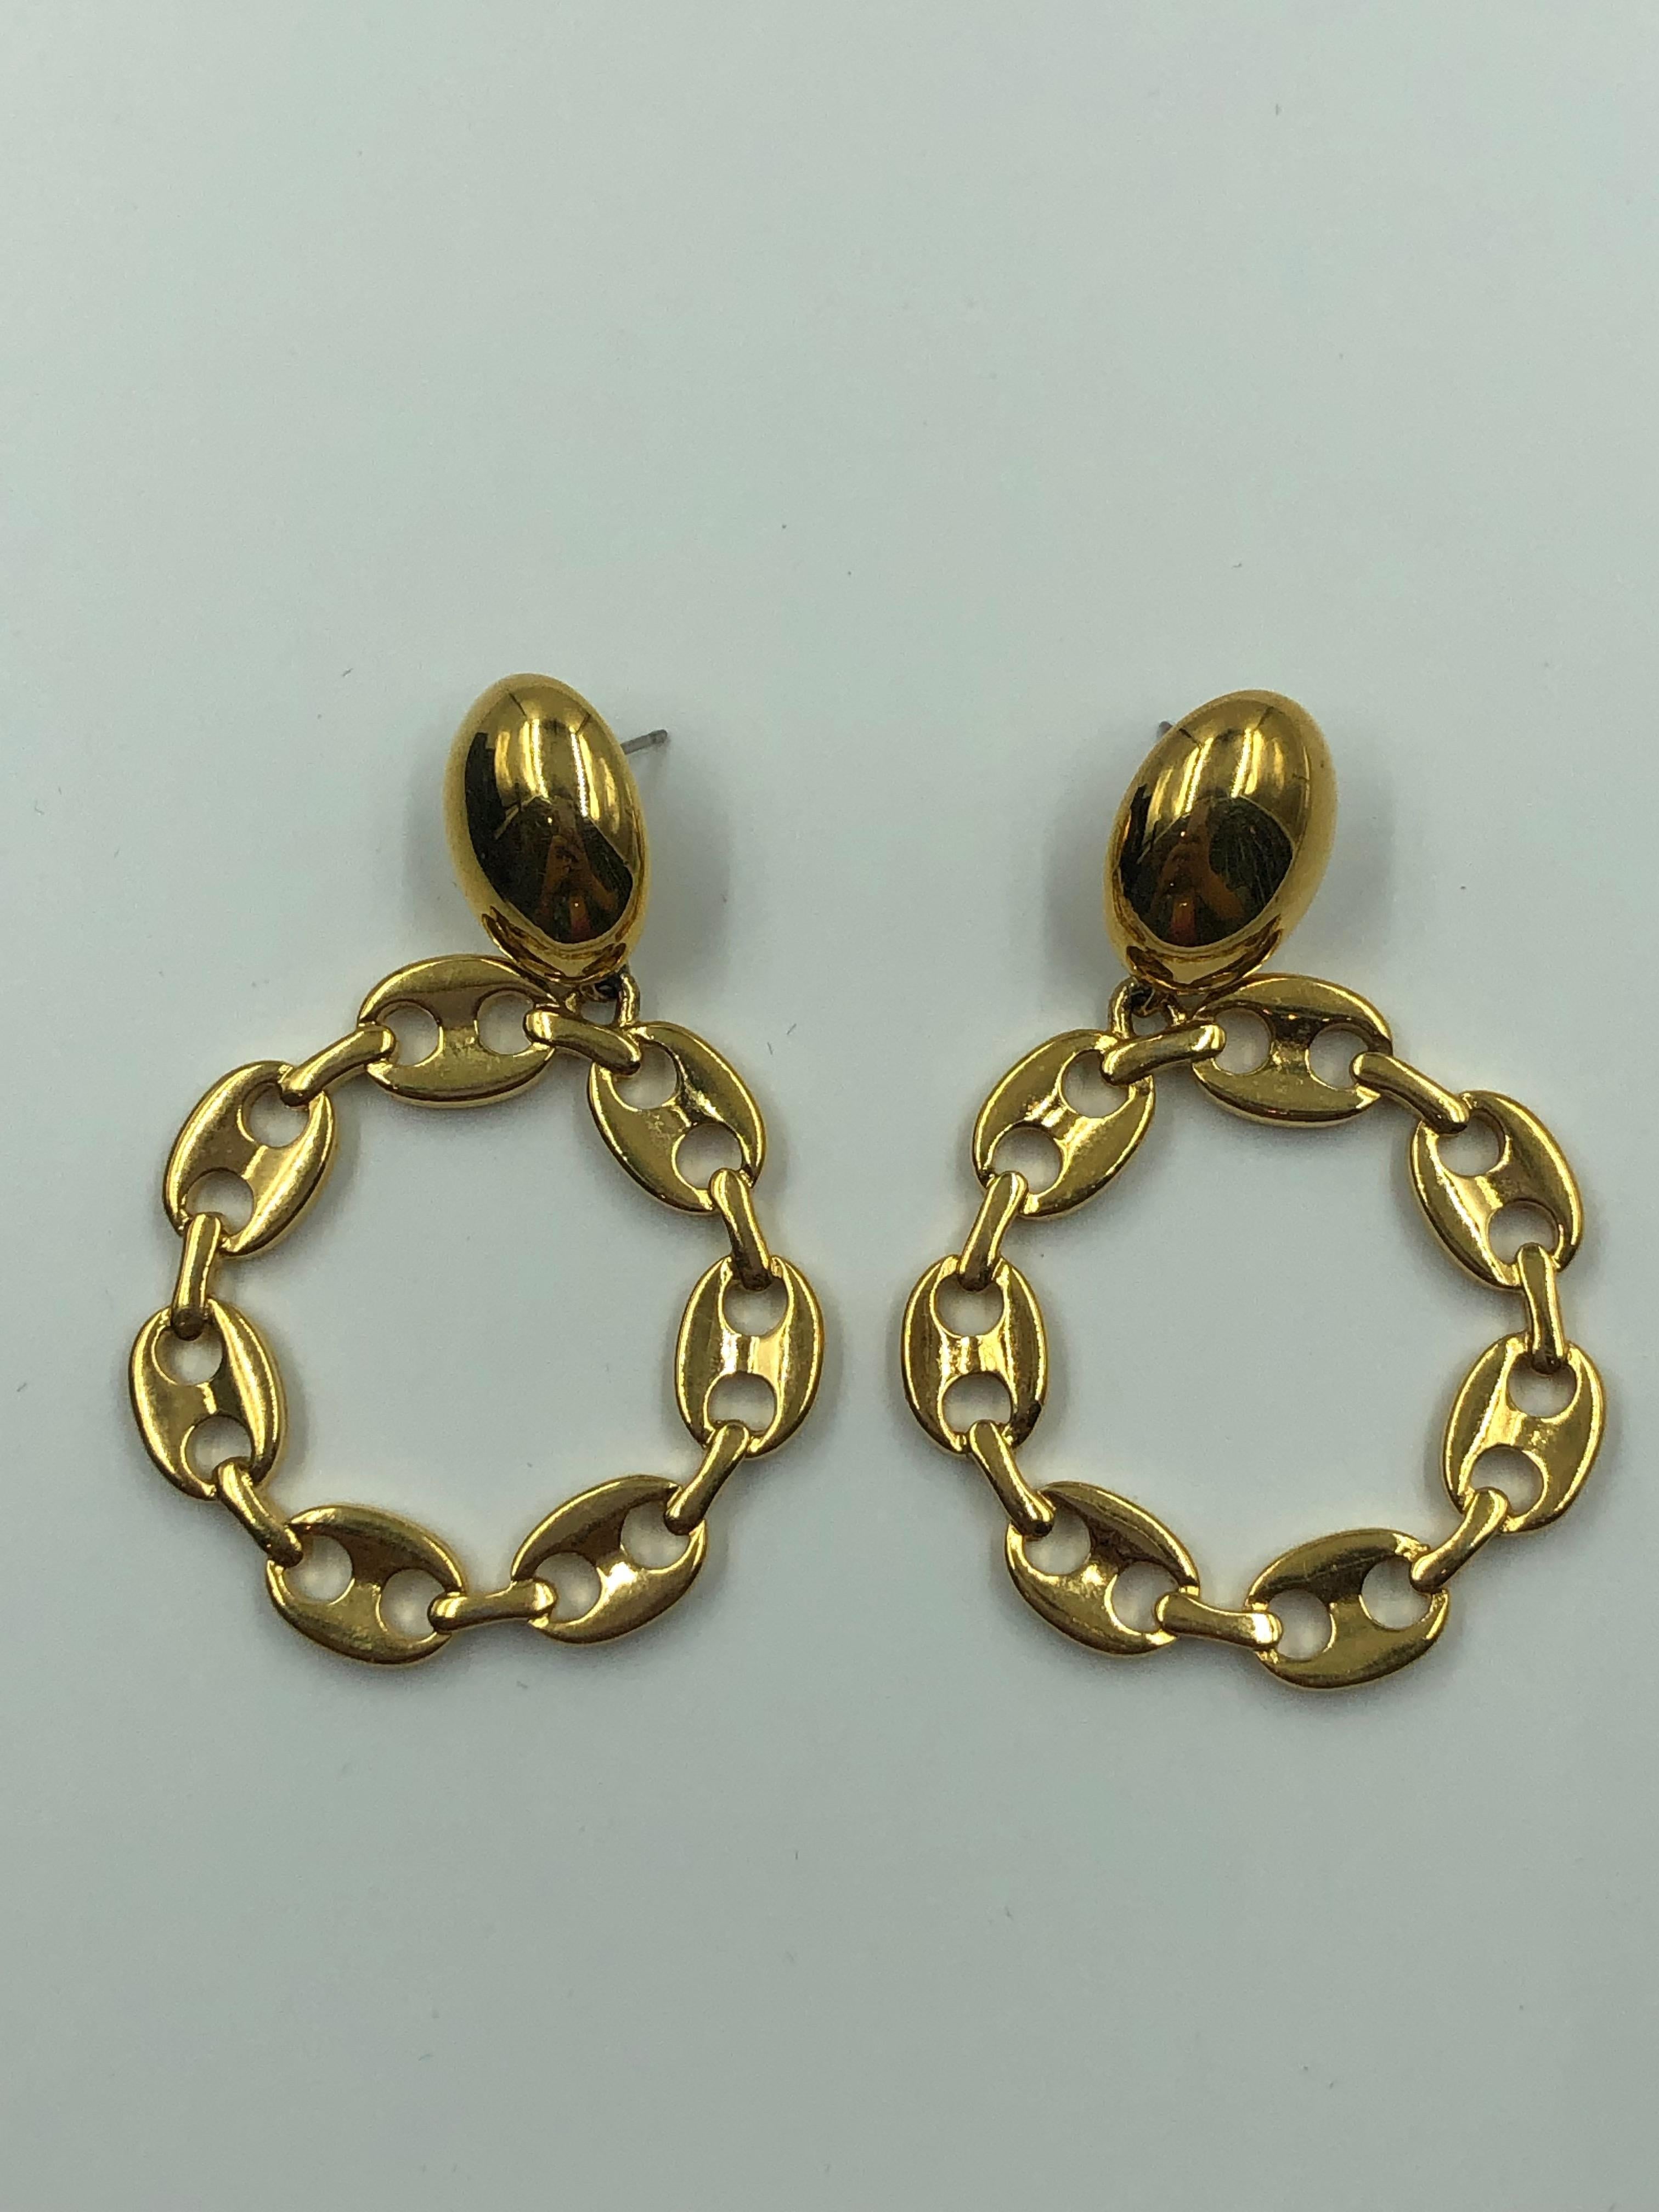 Monet Gucci Style Link Round Gold Tone Pierced Earrings

1.5